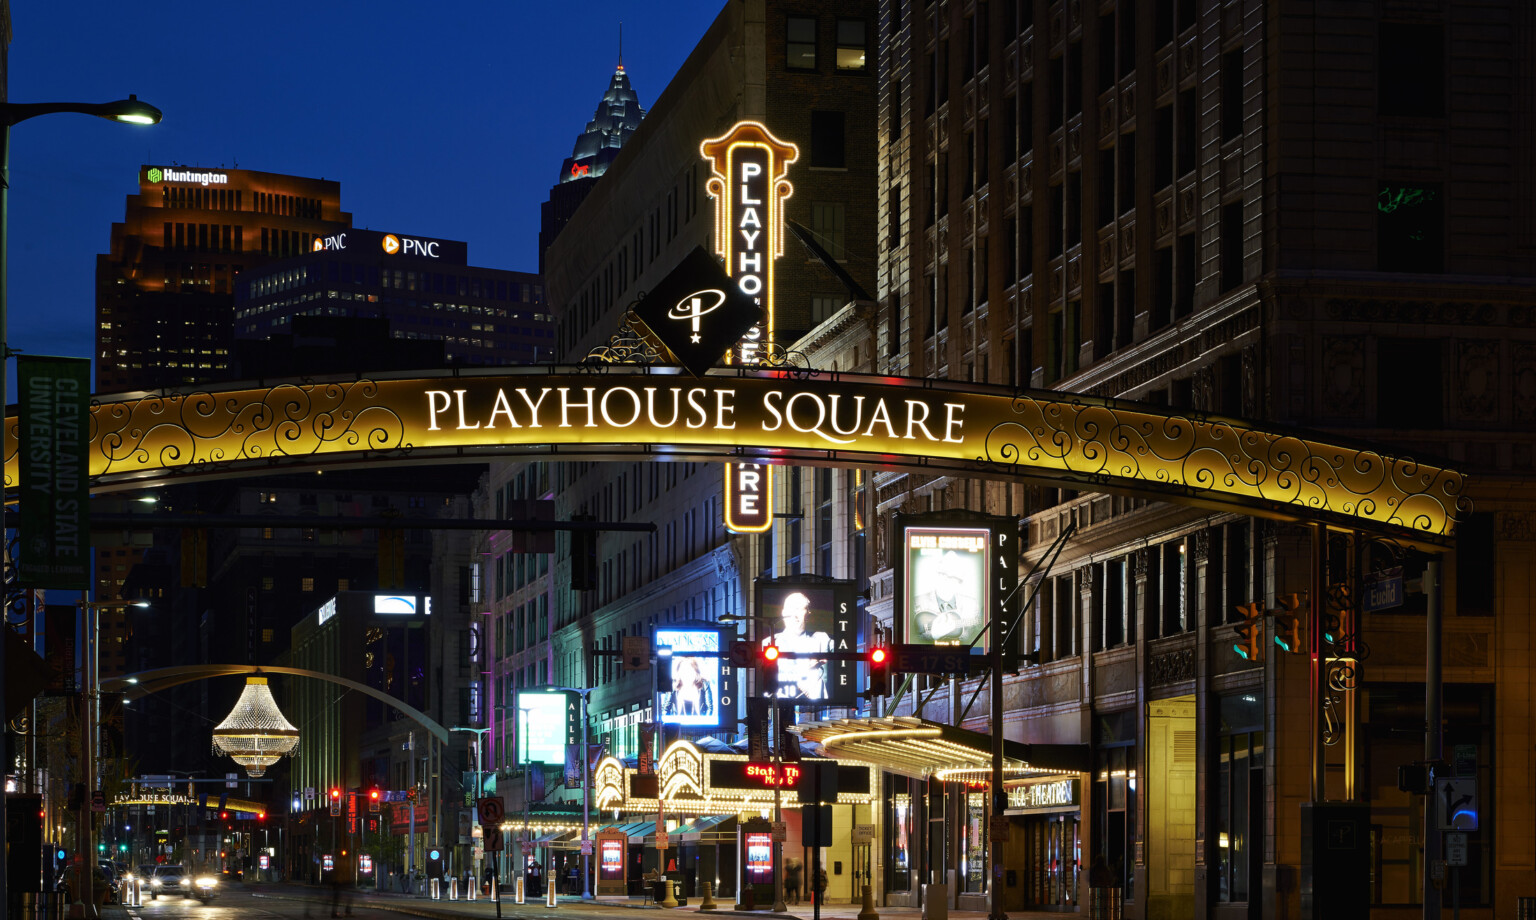 Cleveland's Playhouse Square Theater District after dark, restored vintage neon lighting signage, well-lit pedestrian-friendly walkways and beautifully restored 1920s architecture